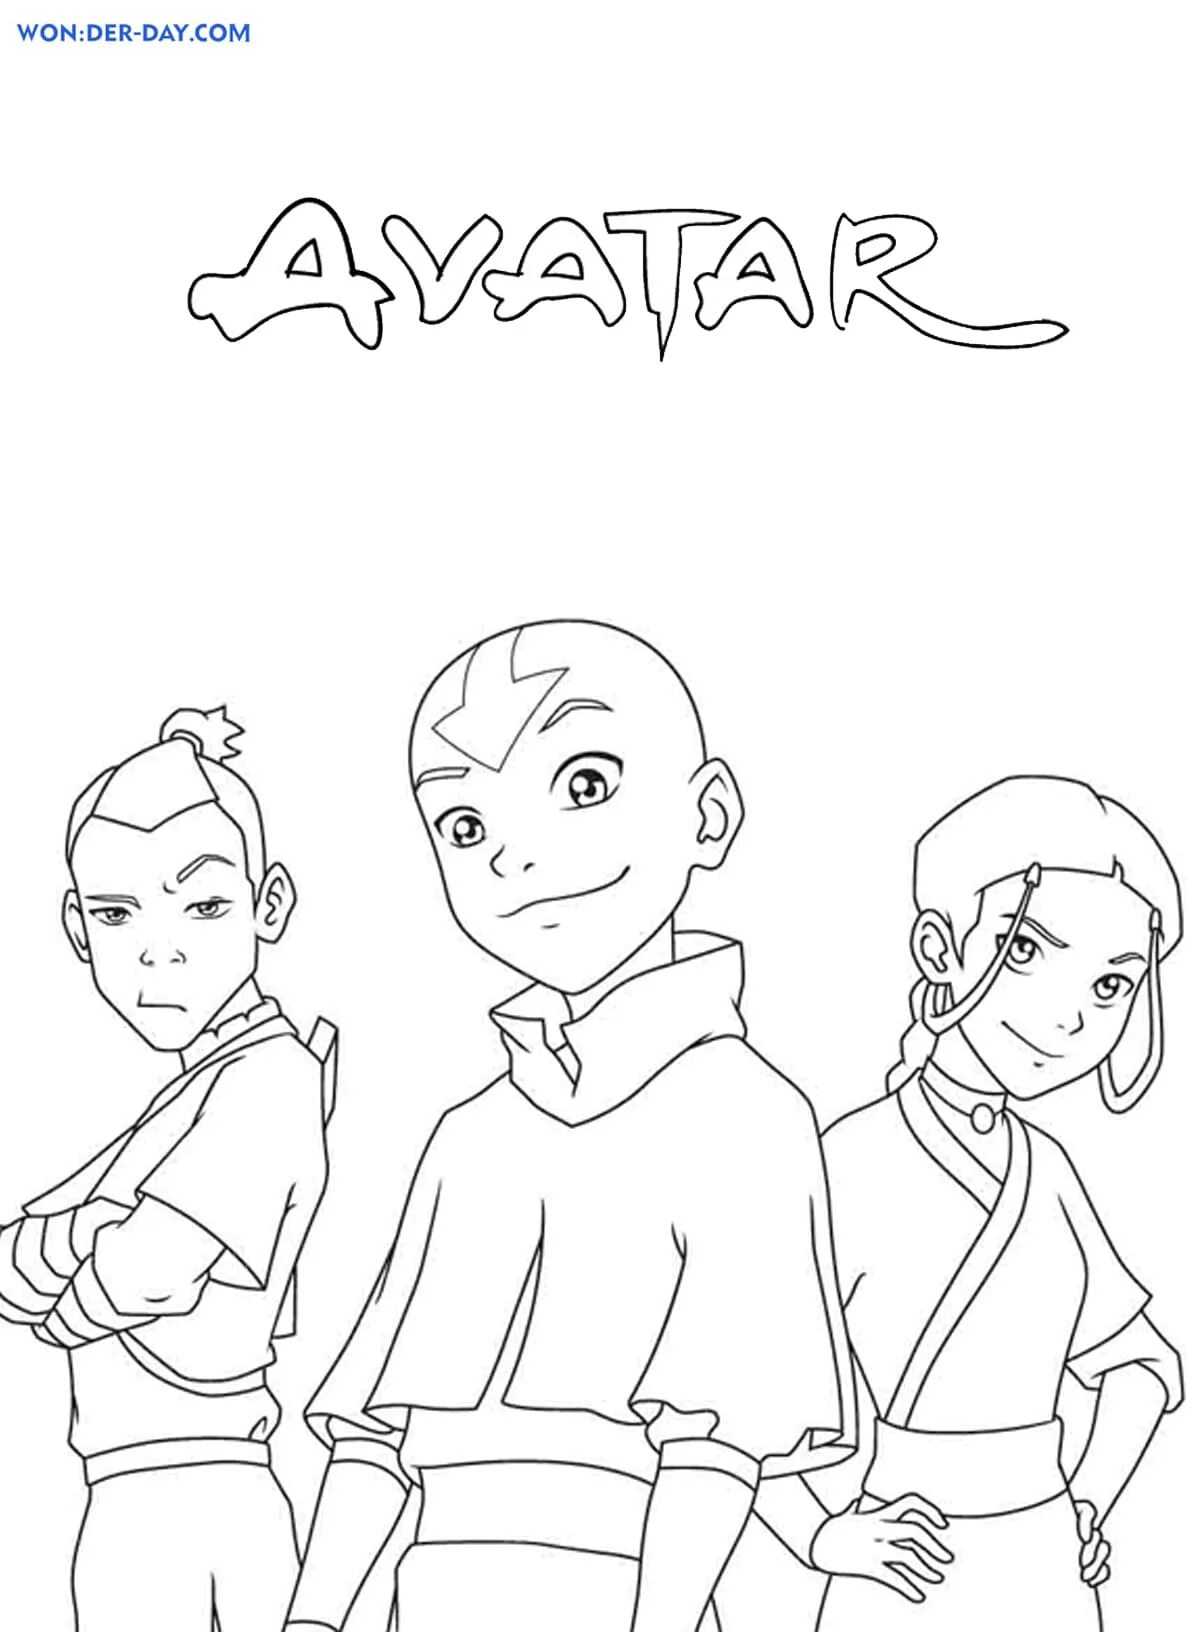 Exciting coloring aang